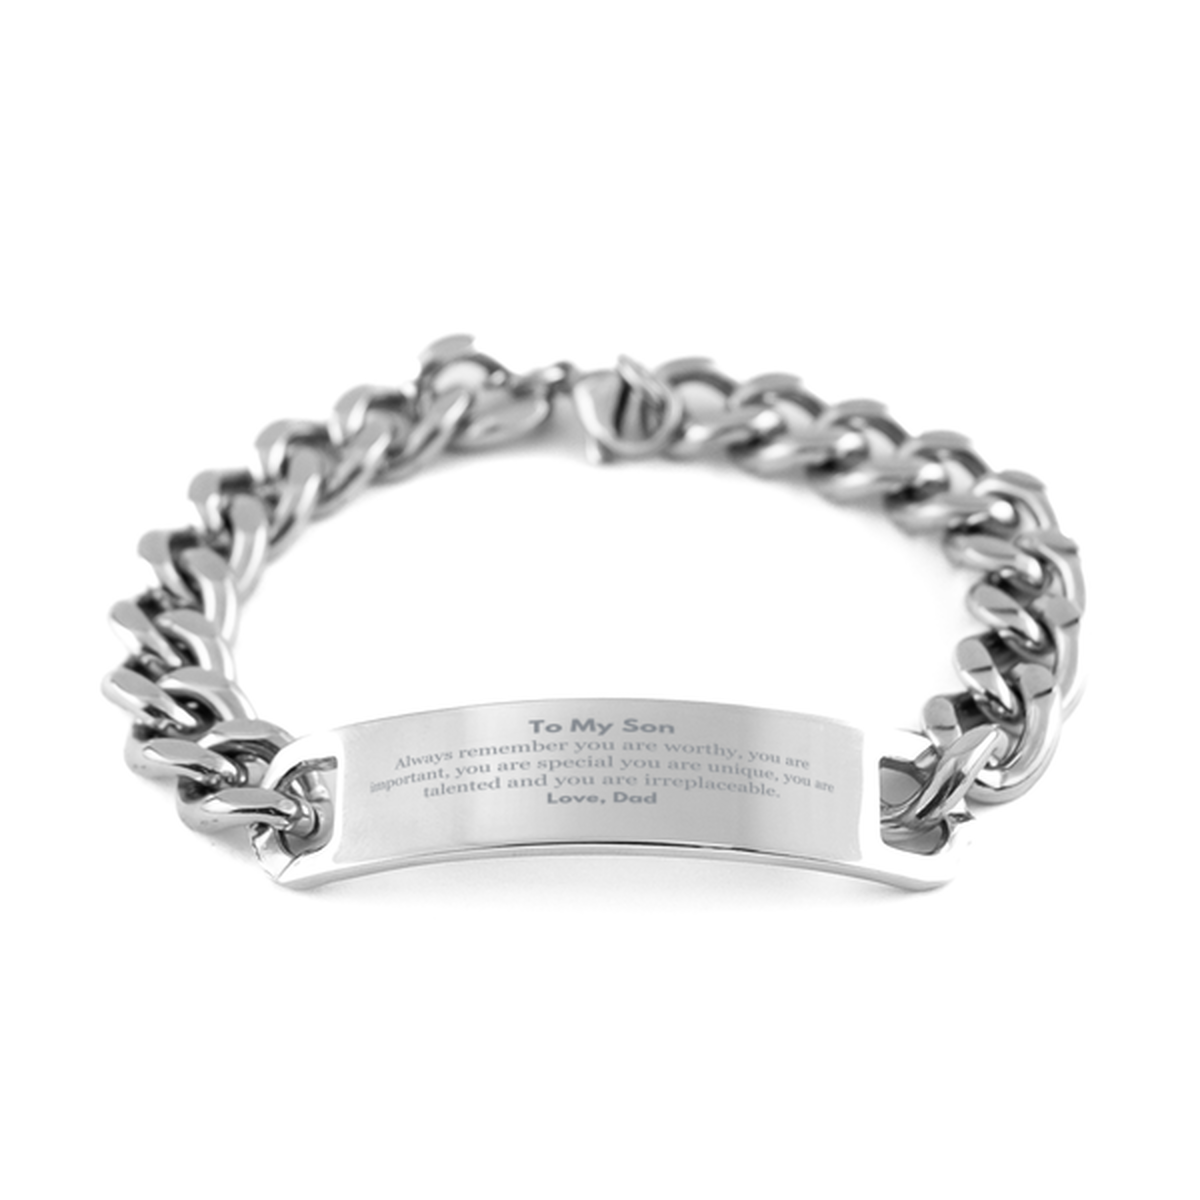 Son Birthday Gifts from Dad, Inspirational Cuban Chain Stainless Steel Bracelet for Son Christmas Graduation Gifts for Son Always remember you are worthy, you are important. Love, Dad